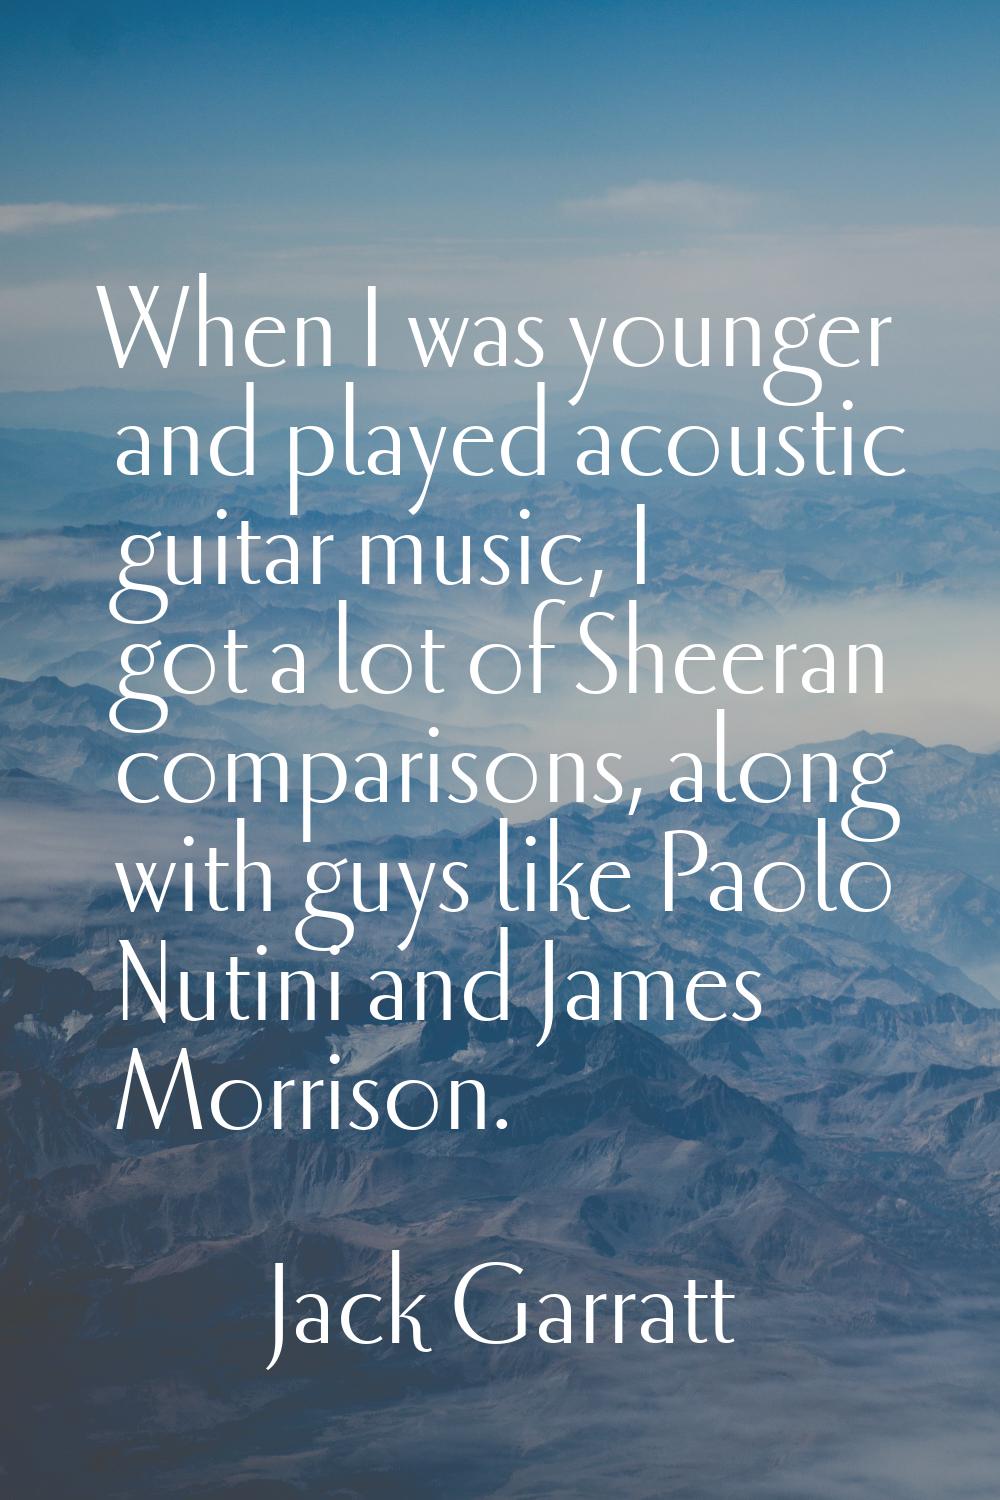 When I was younger and played acoustic guitar music, I got a lot of Sheeran comparisons, along with